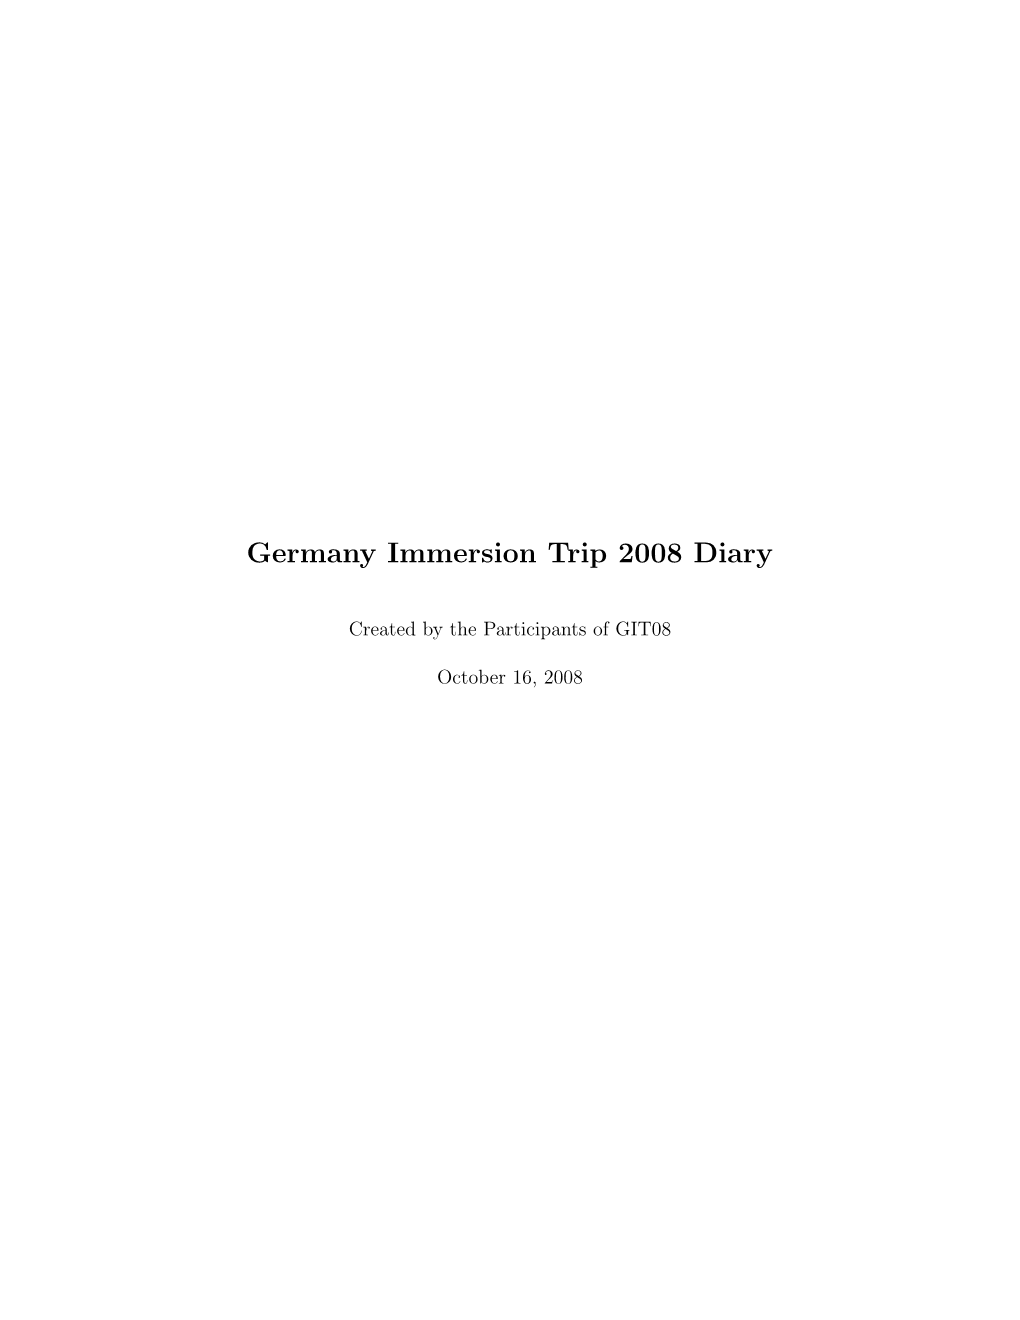 Germany Immersion Trip 2008 Diary